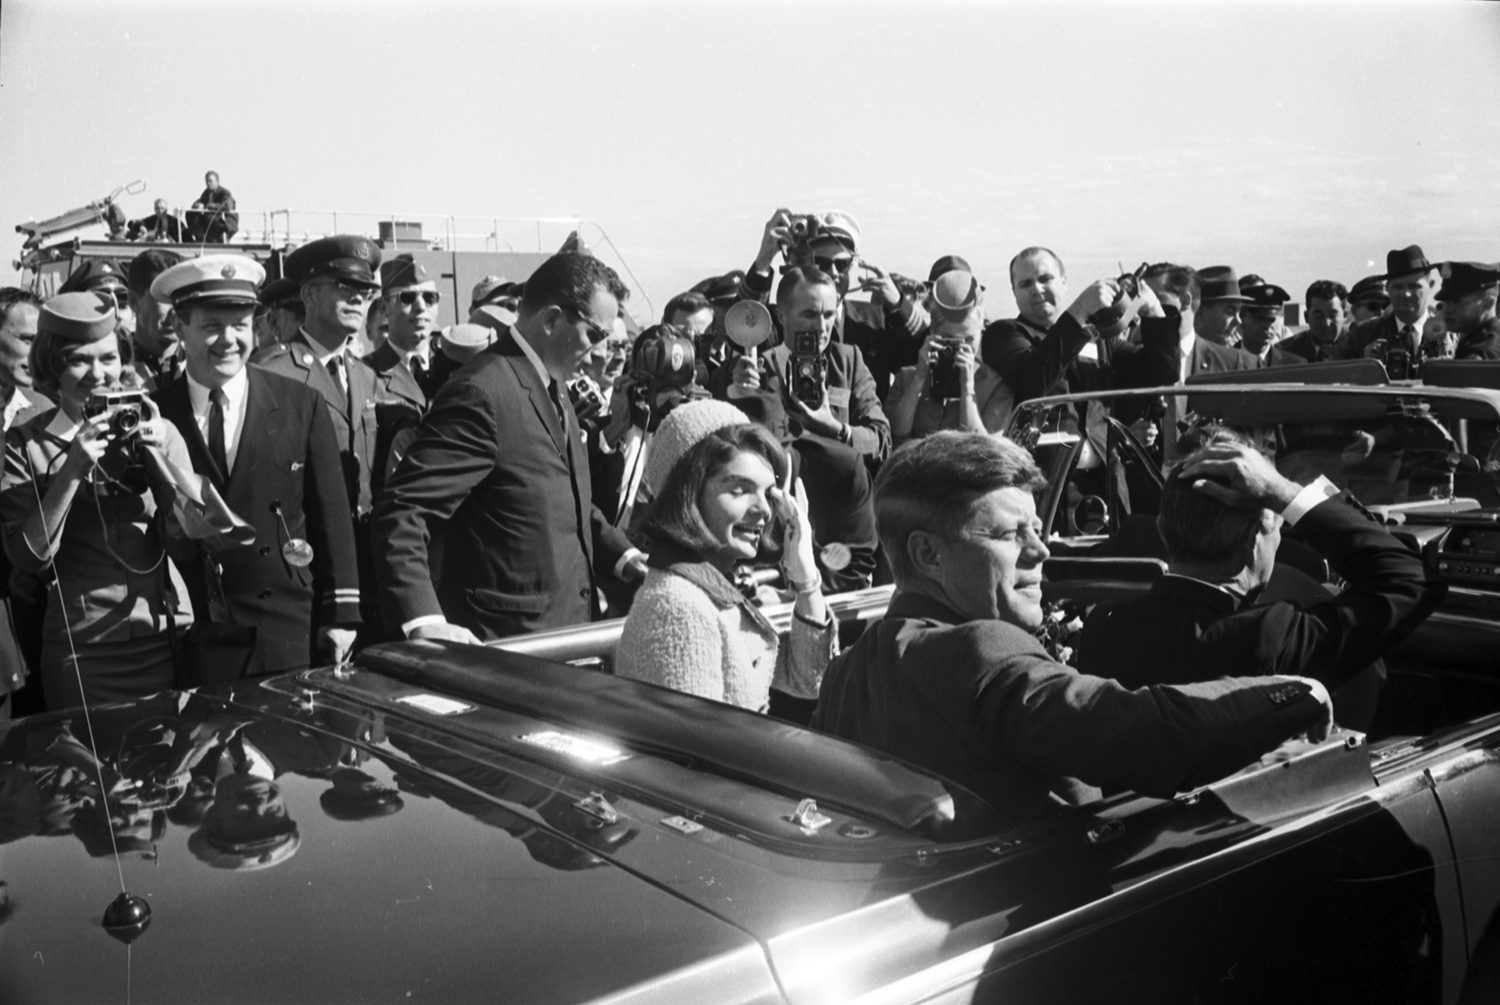 UT Arlington library remembers JFK at special exhibit of rarely seen photograph